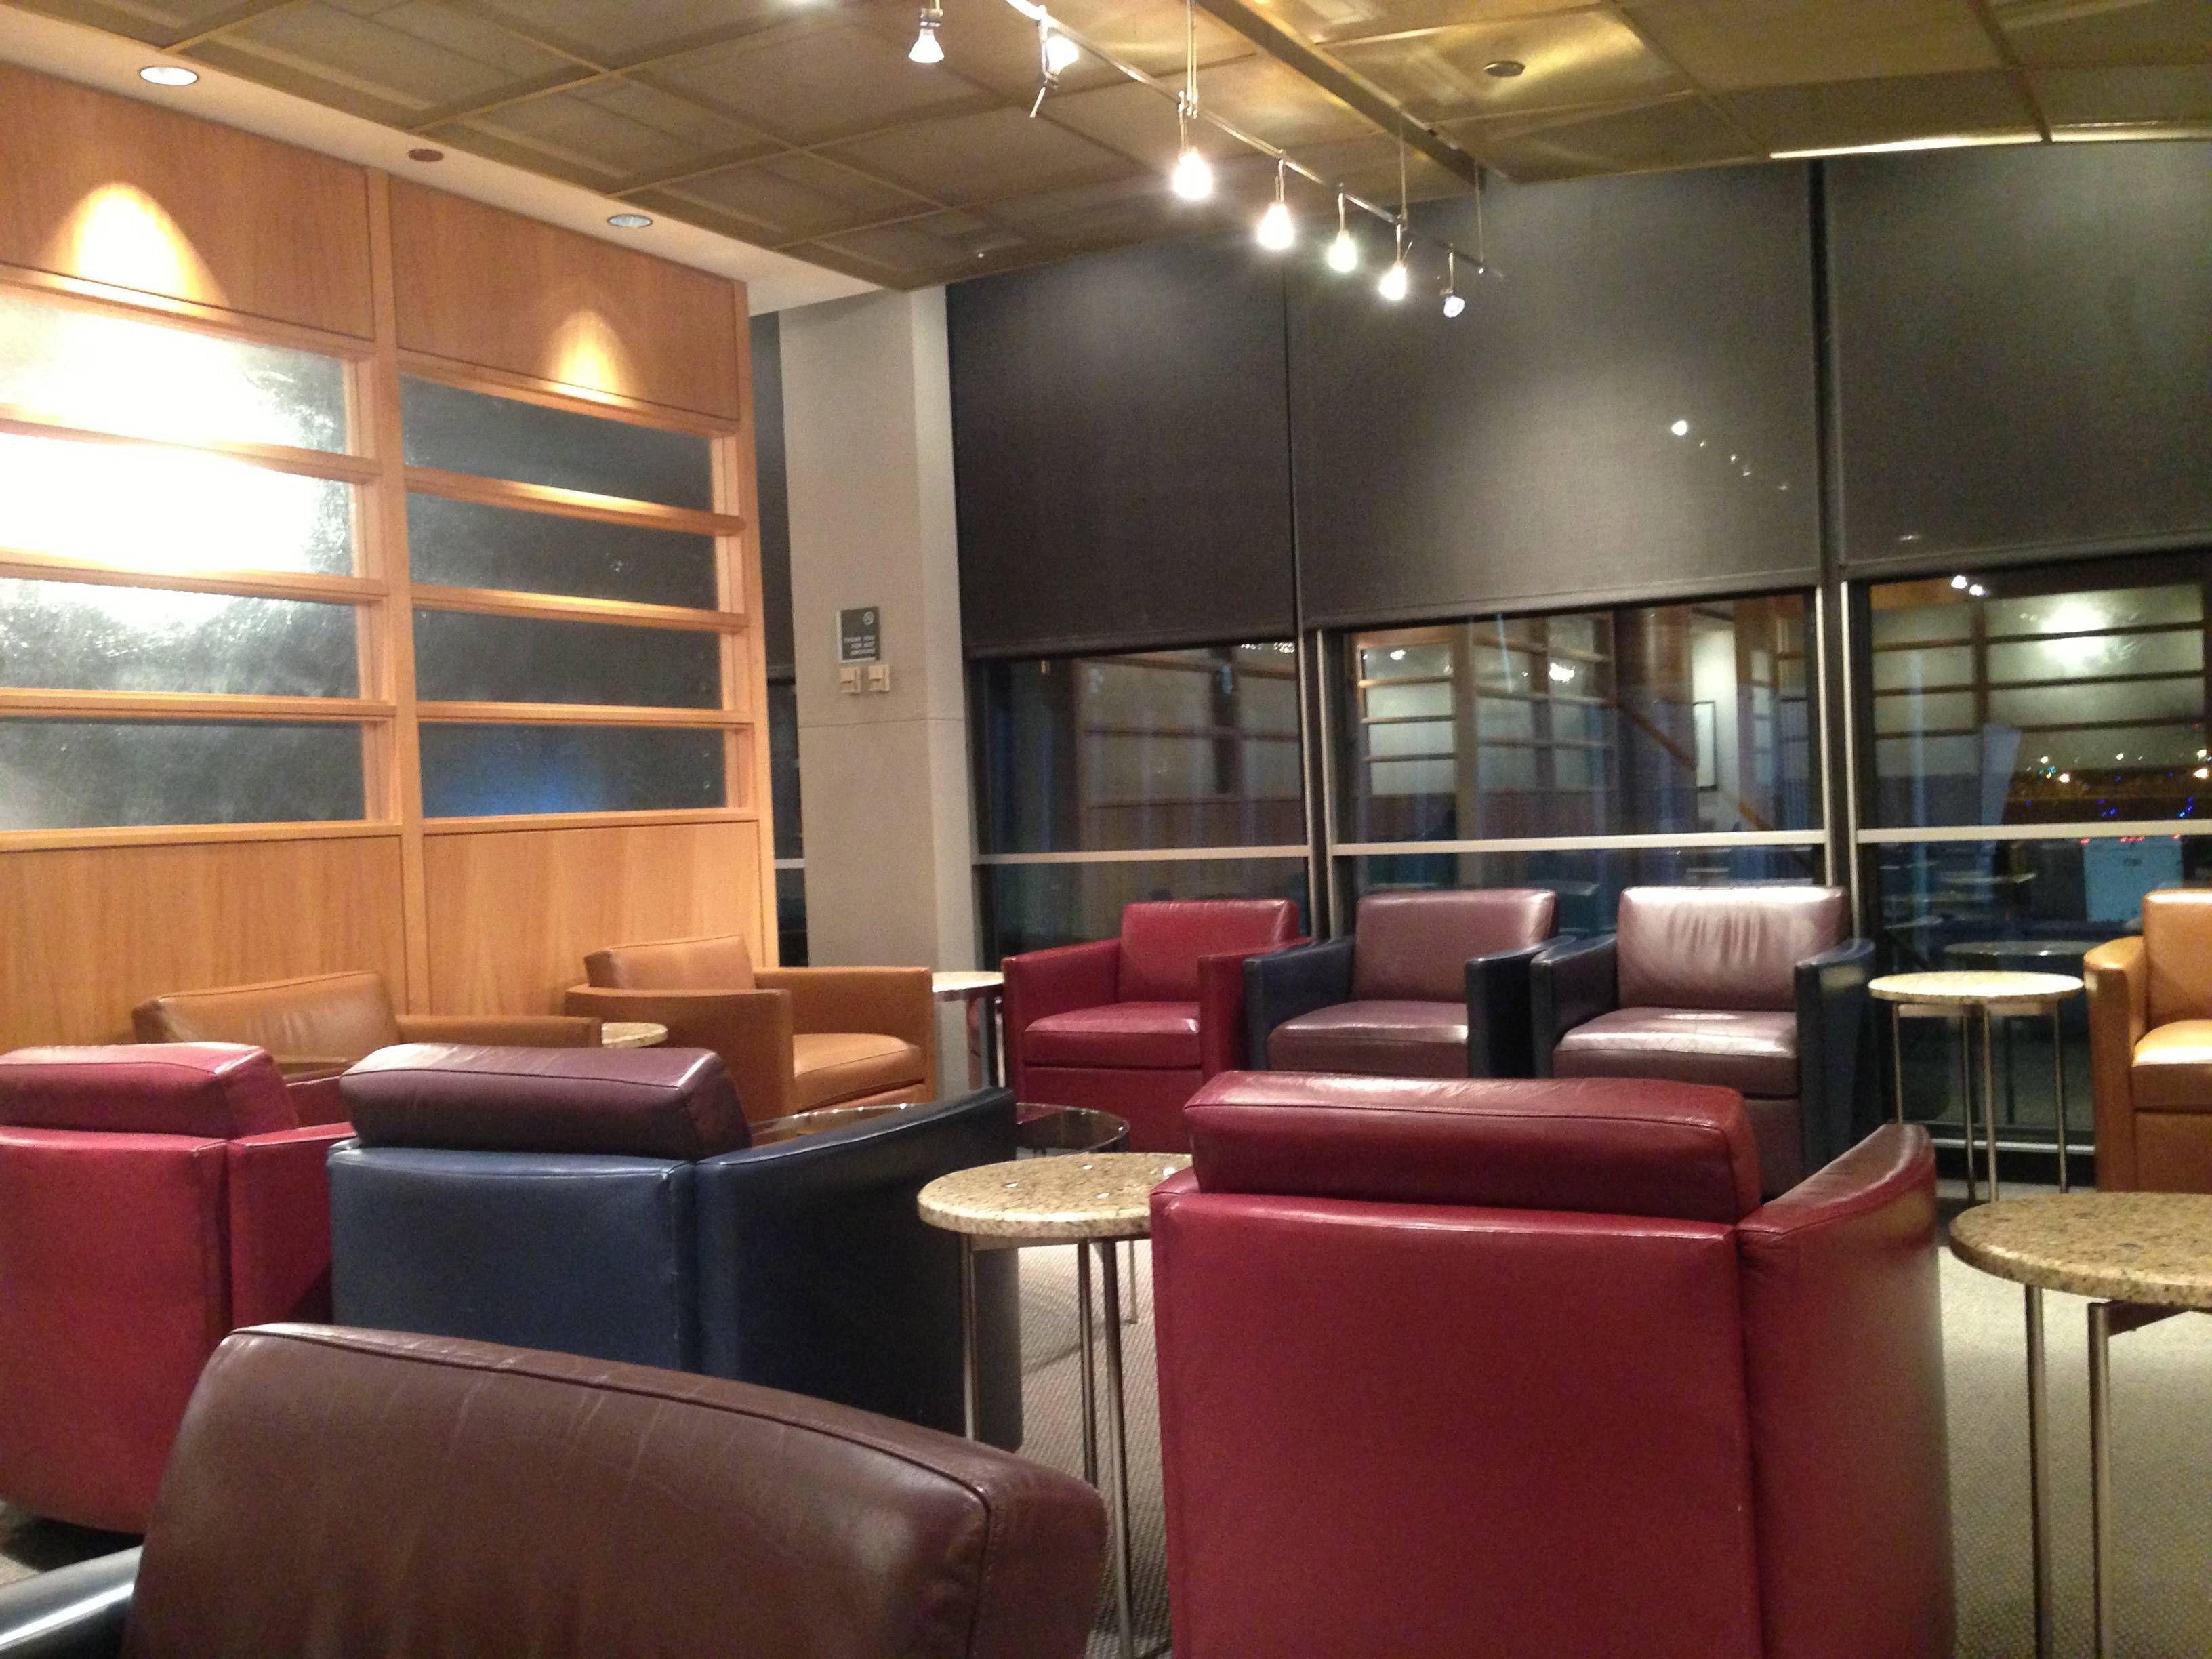 American Airlines Flagship Lounge Chicago